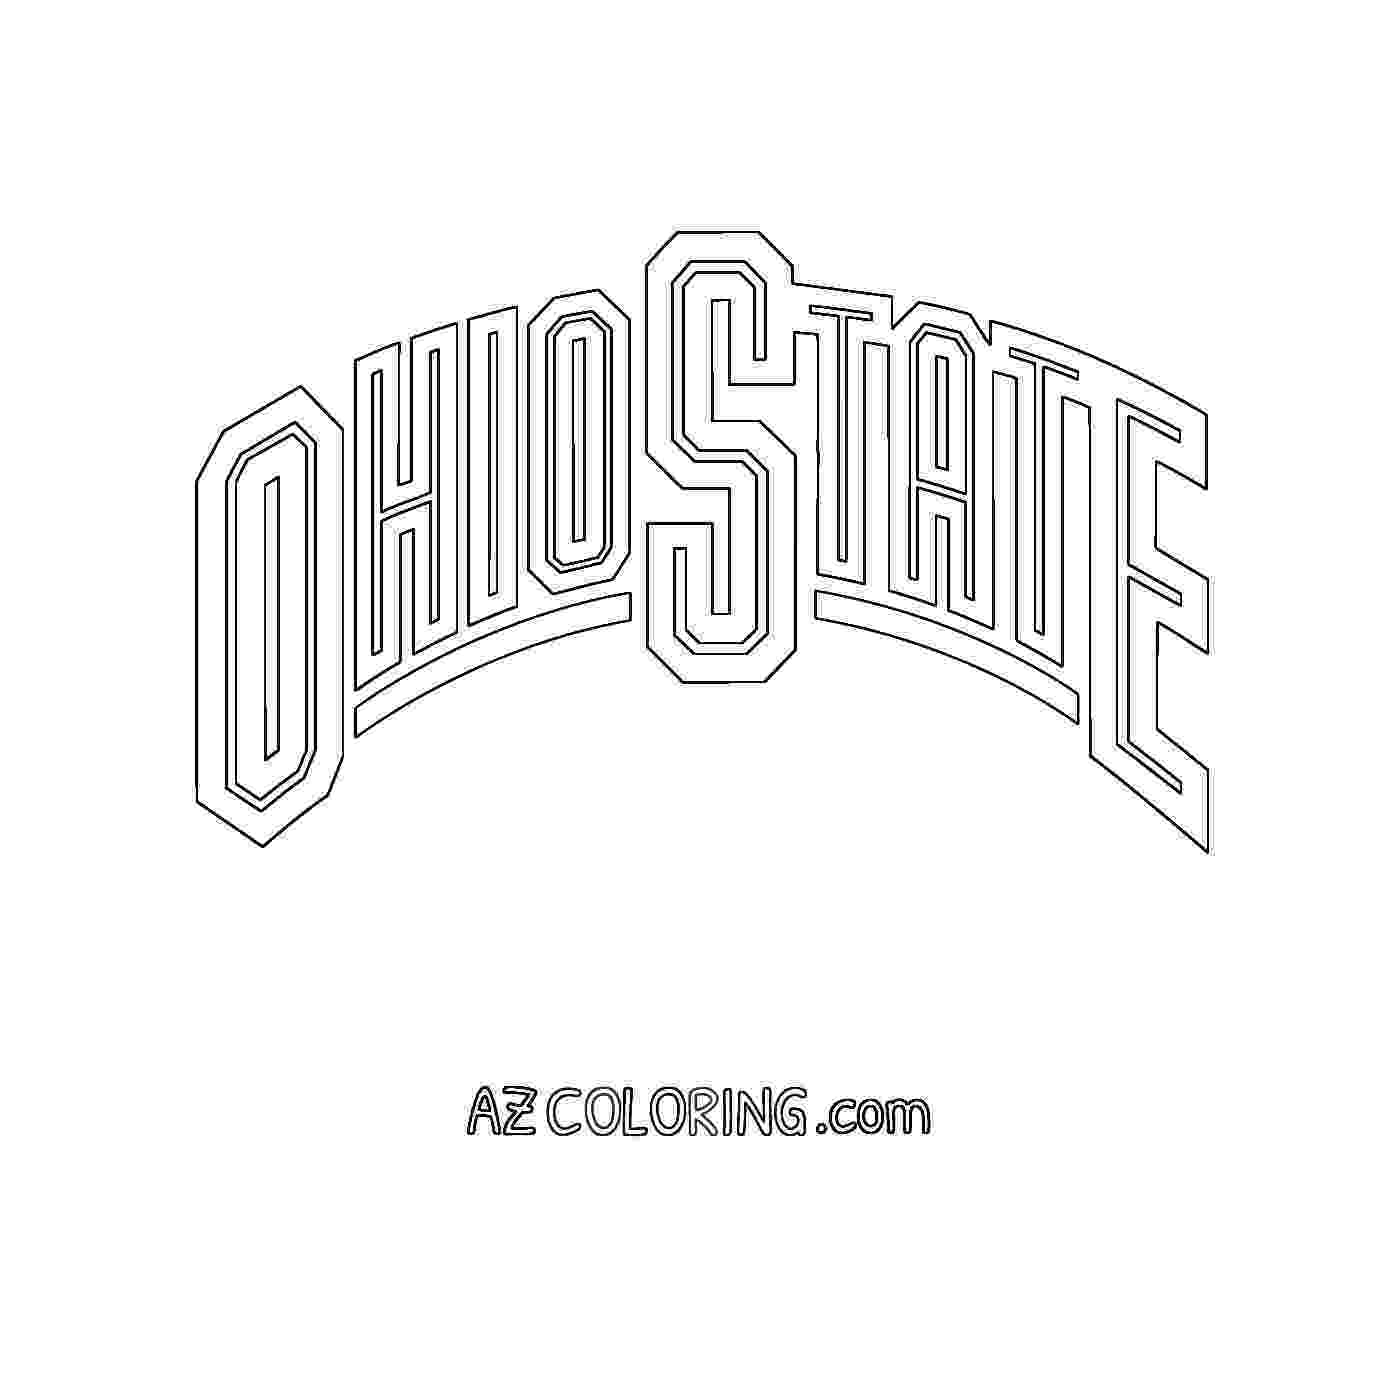 ohio state coloring pages ohio state flower coloring page woo jr kids activities state pages coloring ohio 